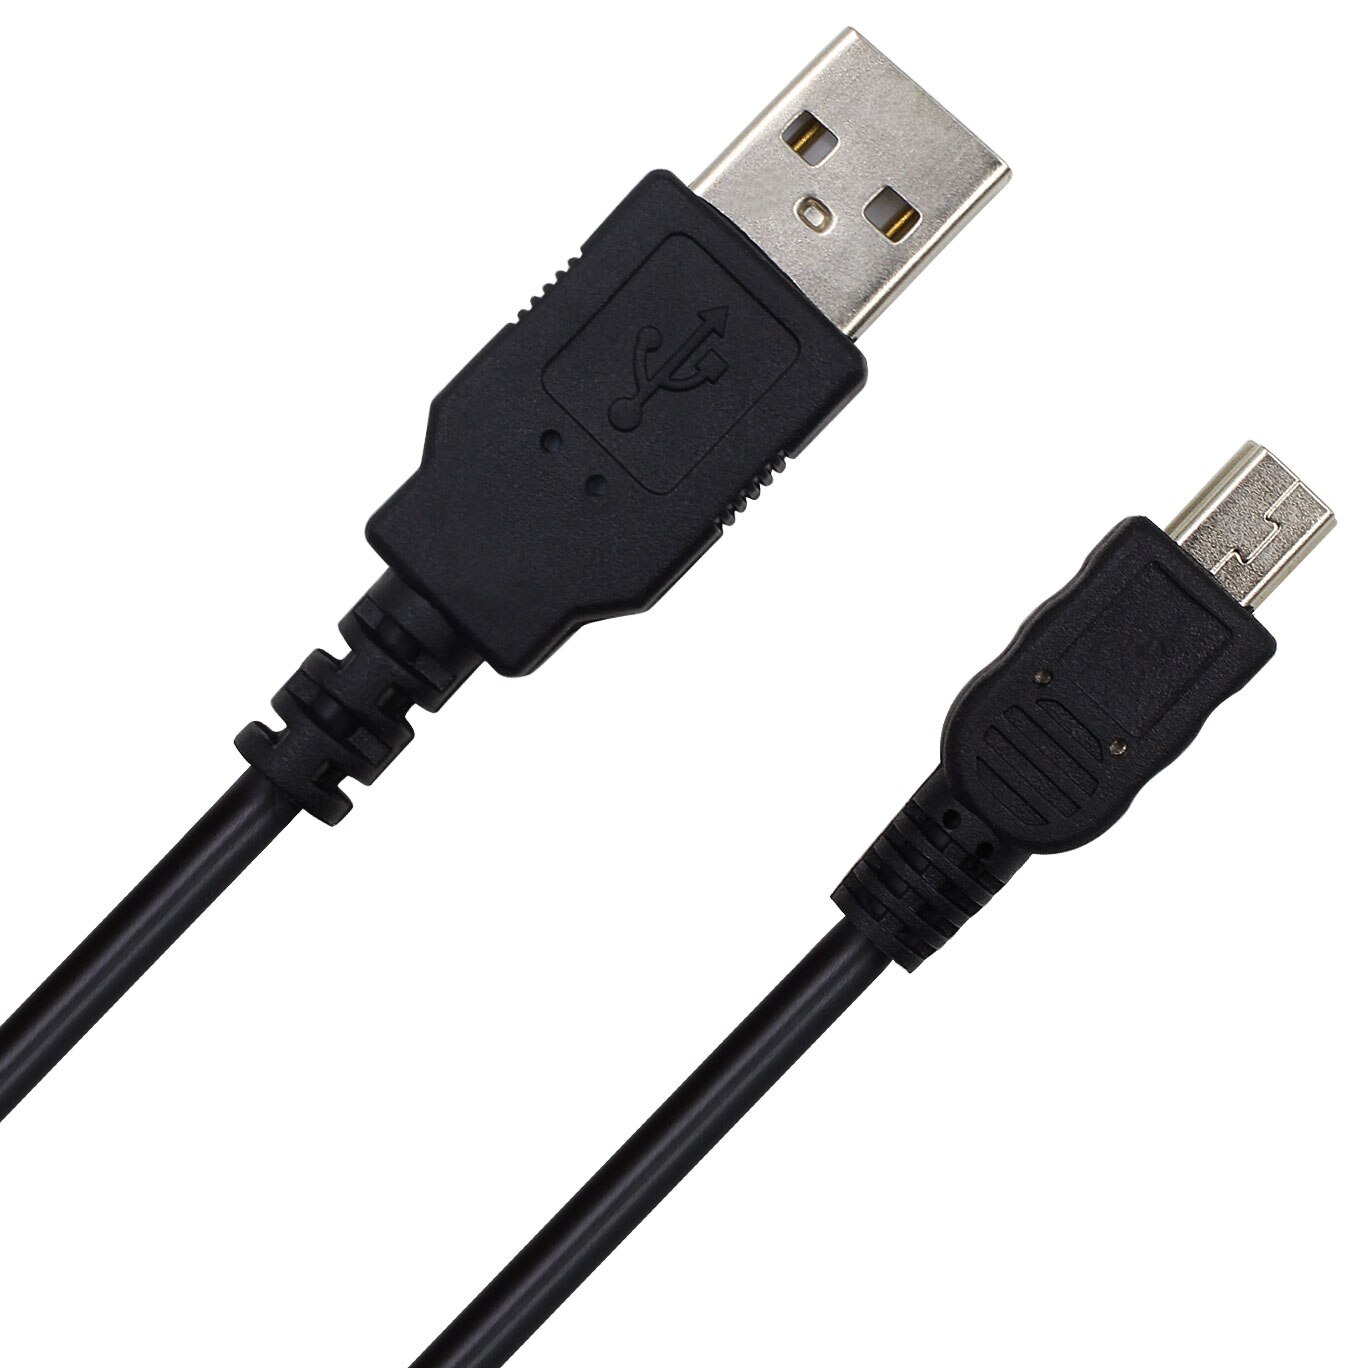 USB Sync Data Transfer Power Charger Cable Cord PC Verbinding voor Garmin Nuvi GPS